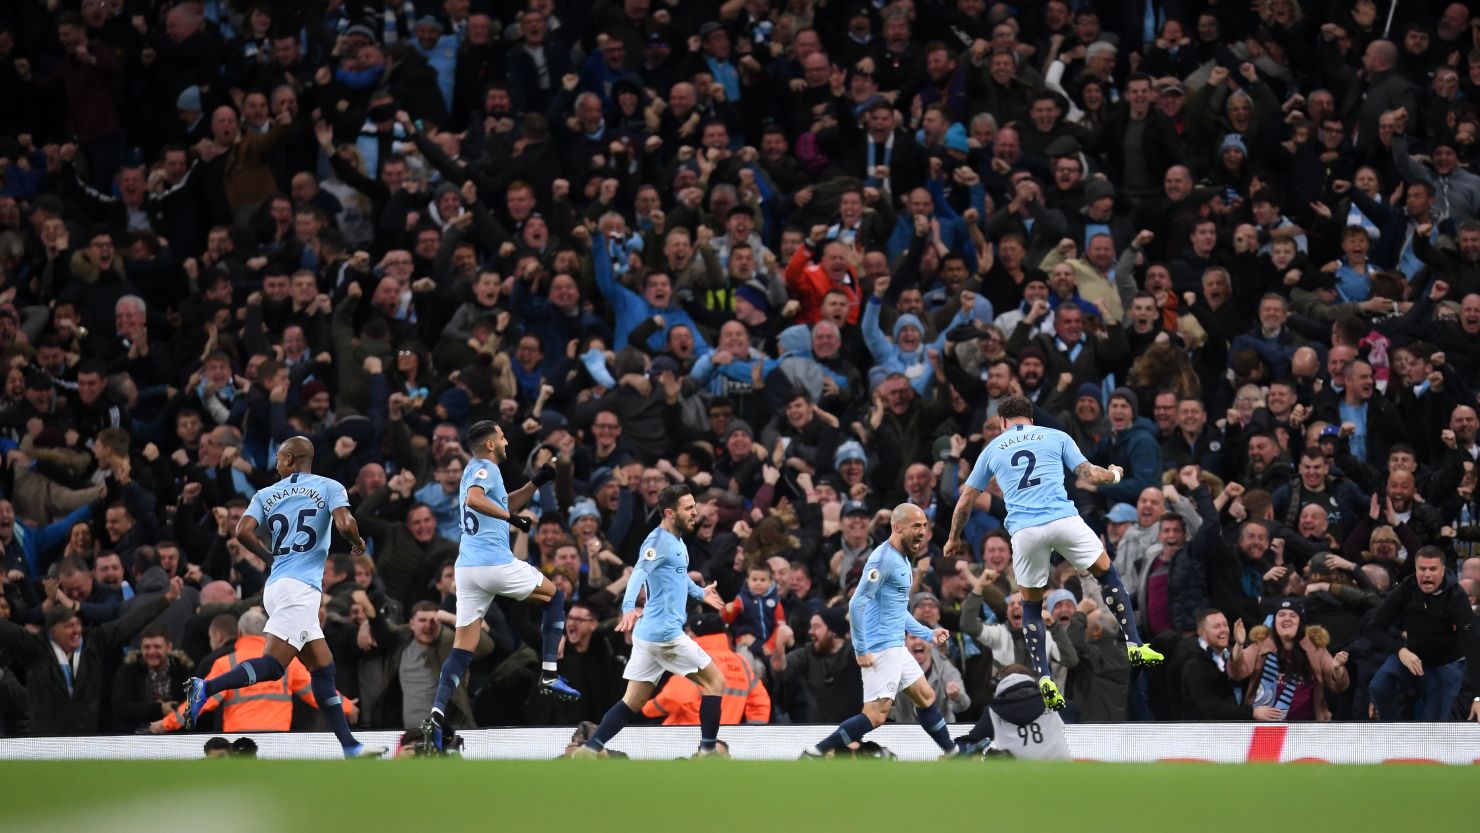 David Silva celebrates with teammates after scoring the first goal during the Manchester derby at the Etihad Stadium.